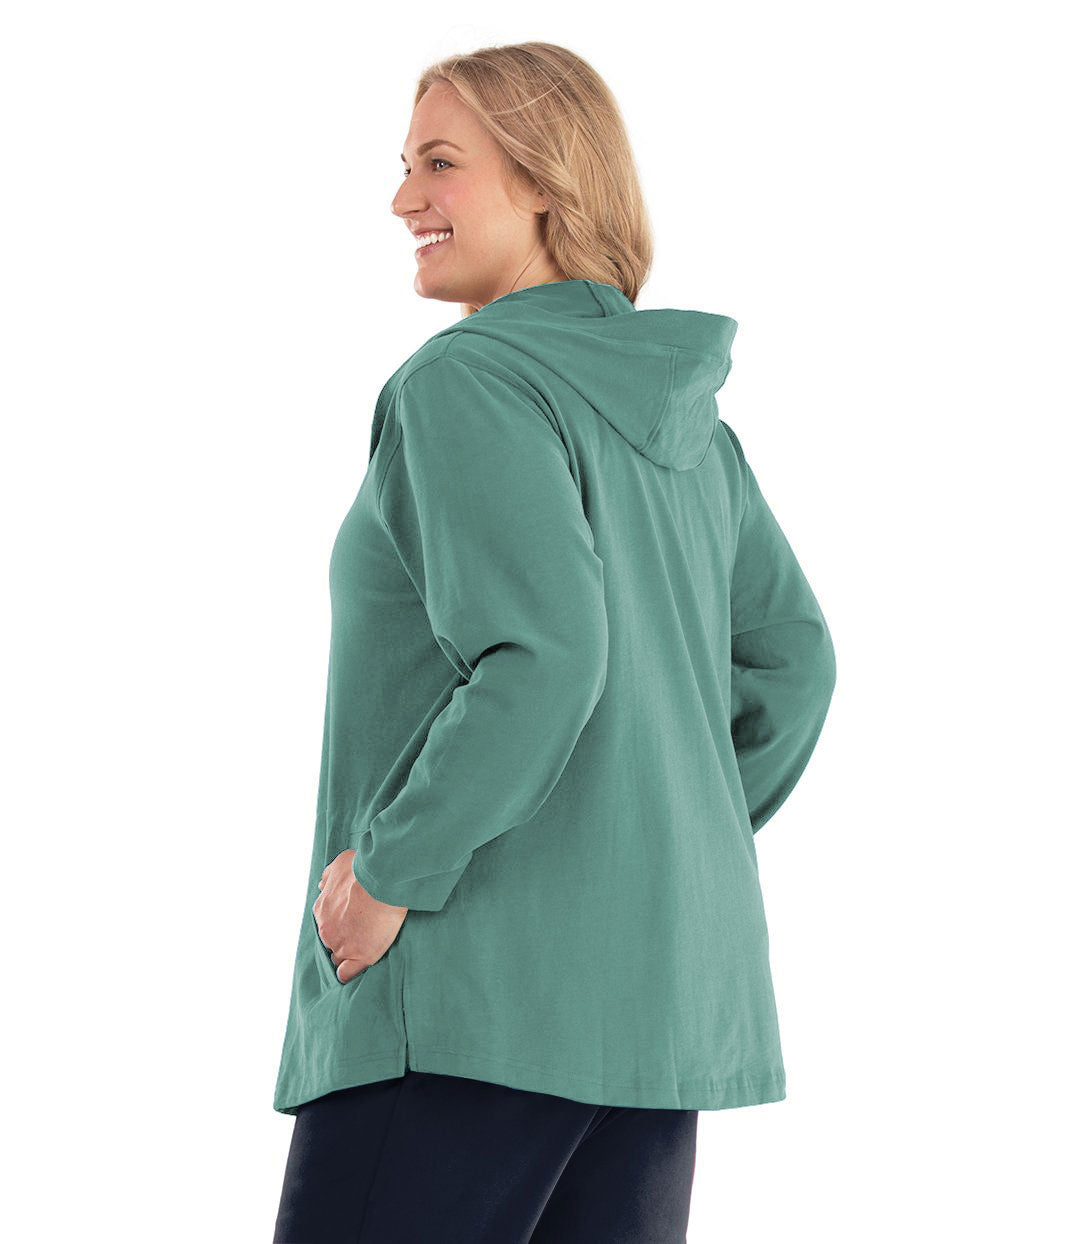 Plus size woman, facing back, wearing Legacy Cotton Casual Button Up Hoodie in Lichen Green. Both hands are in side pockets of hoodie.